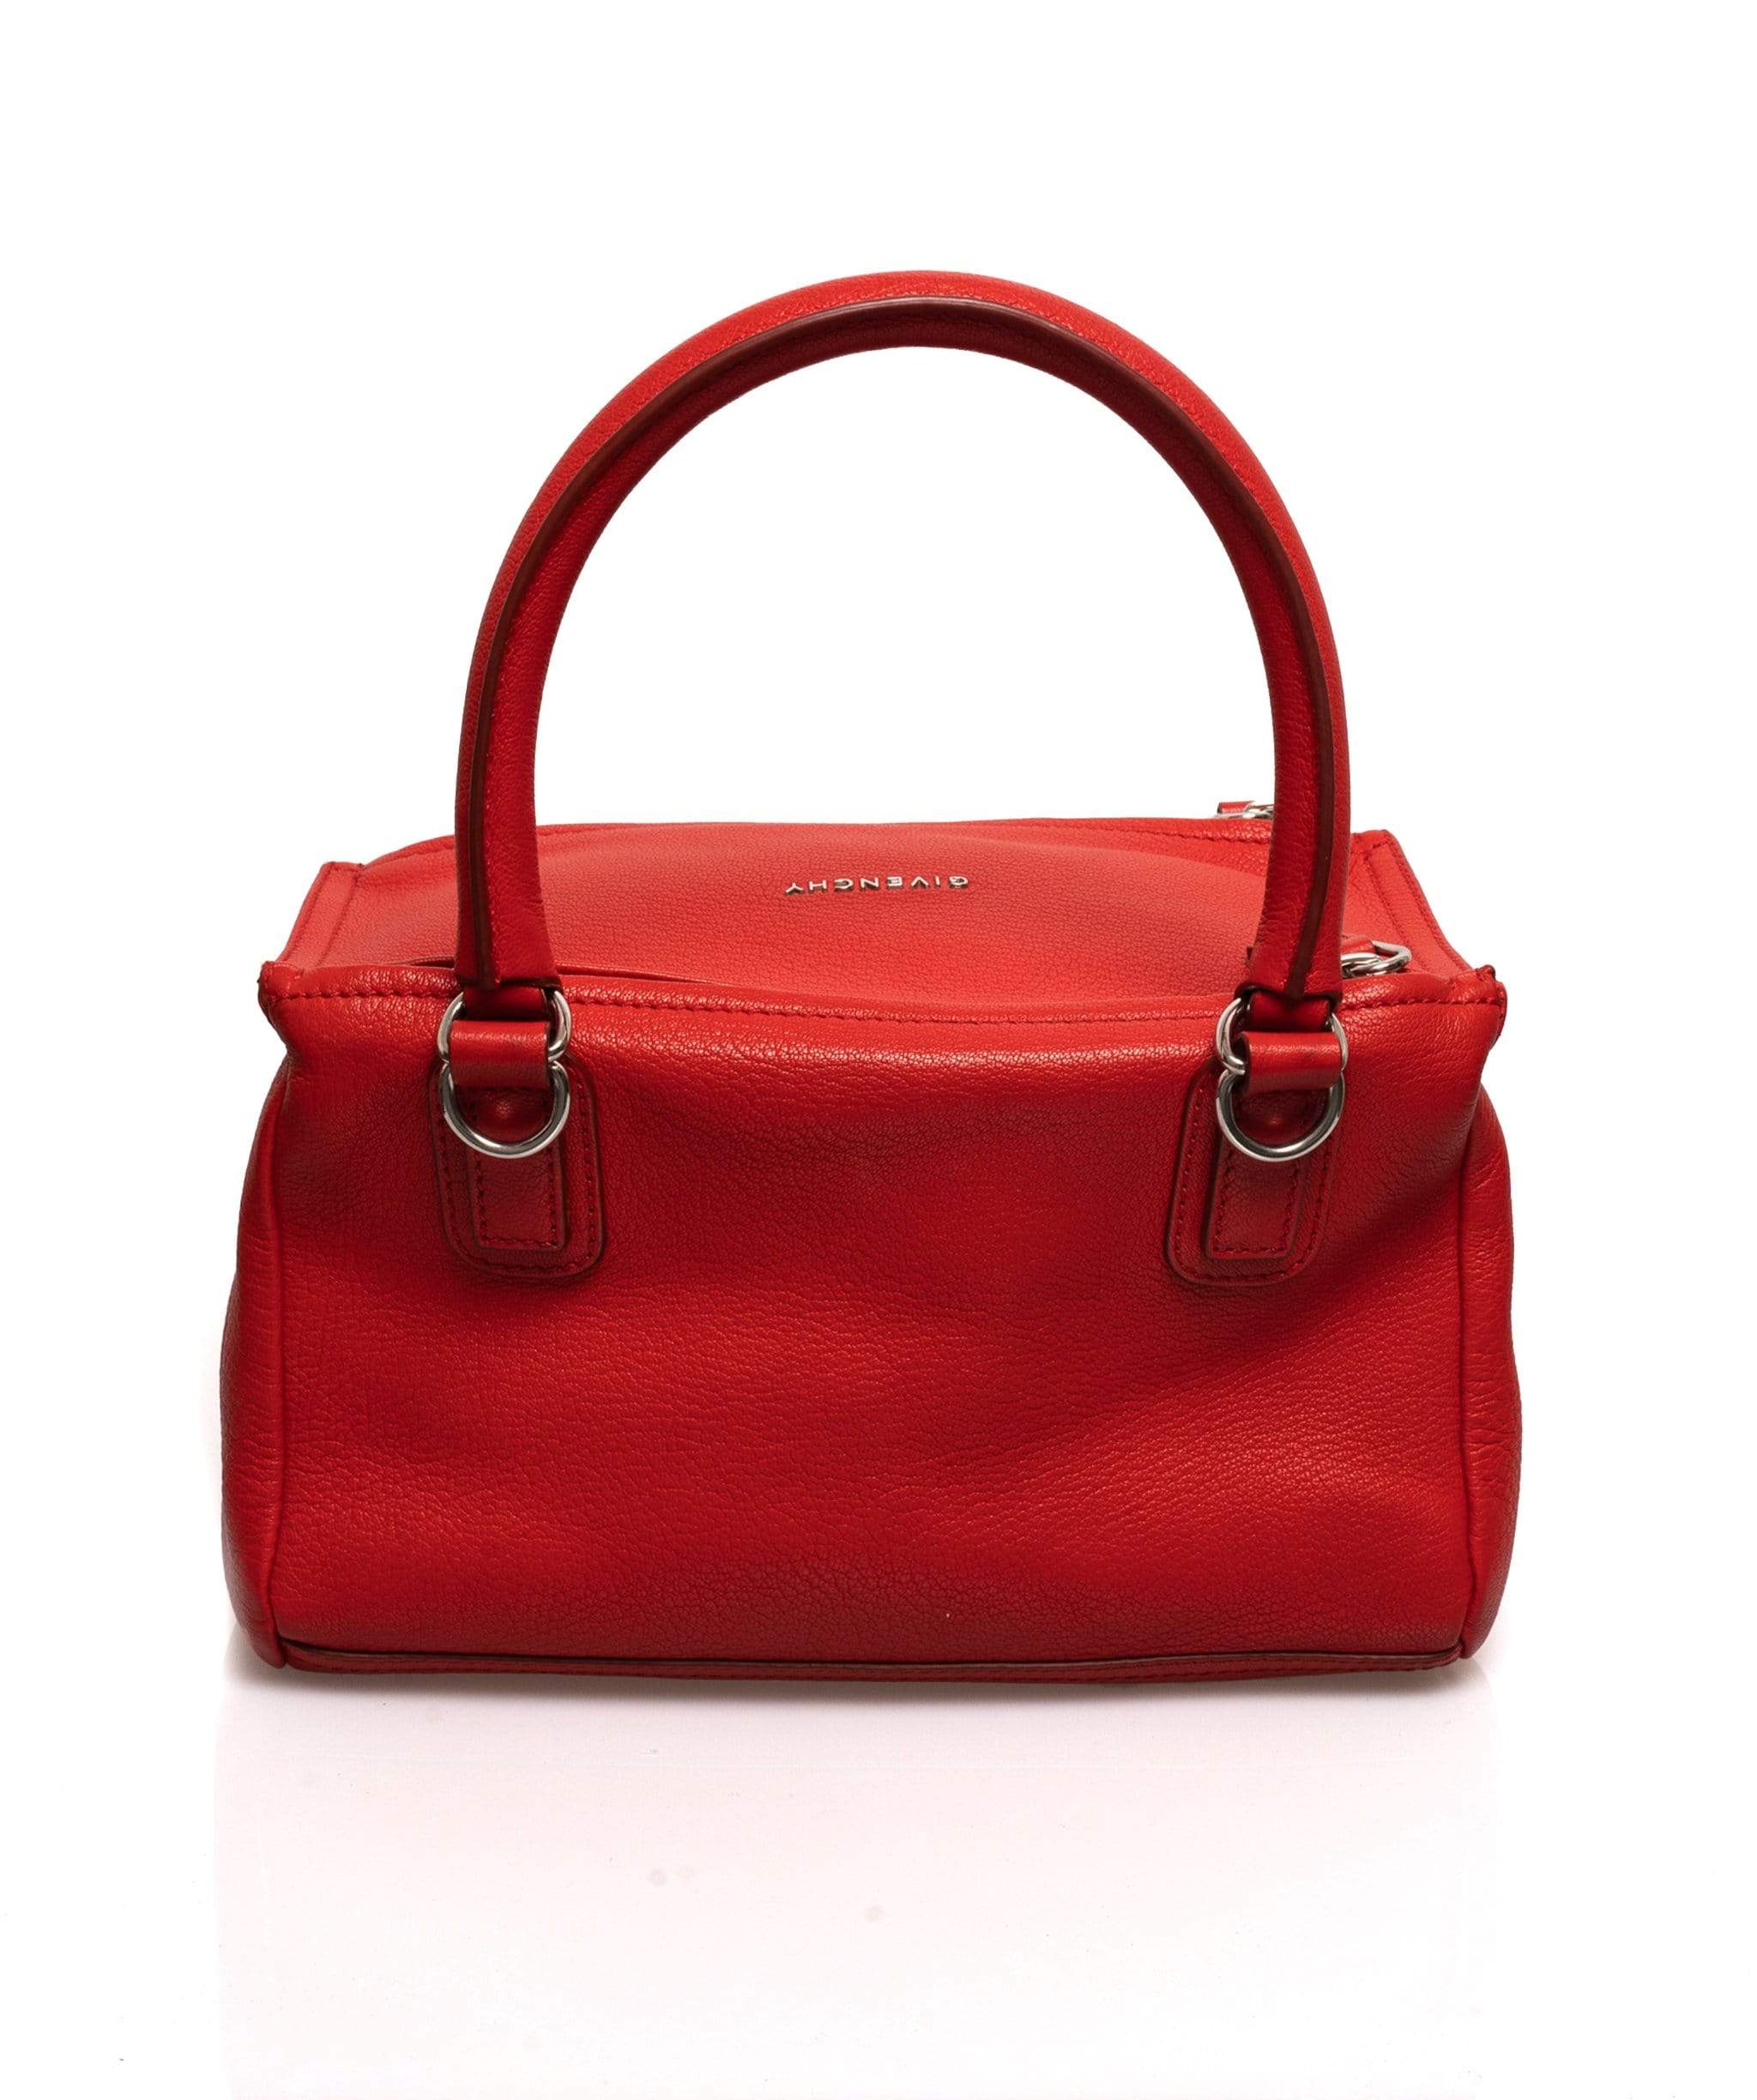 Givenchy Givenchy Pandora Red Leather Bag - ADL1226